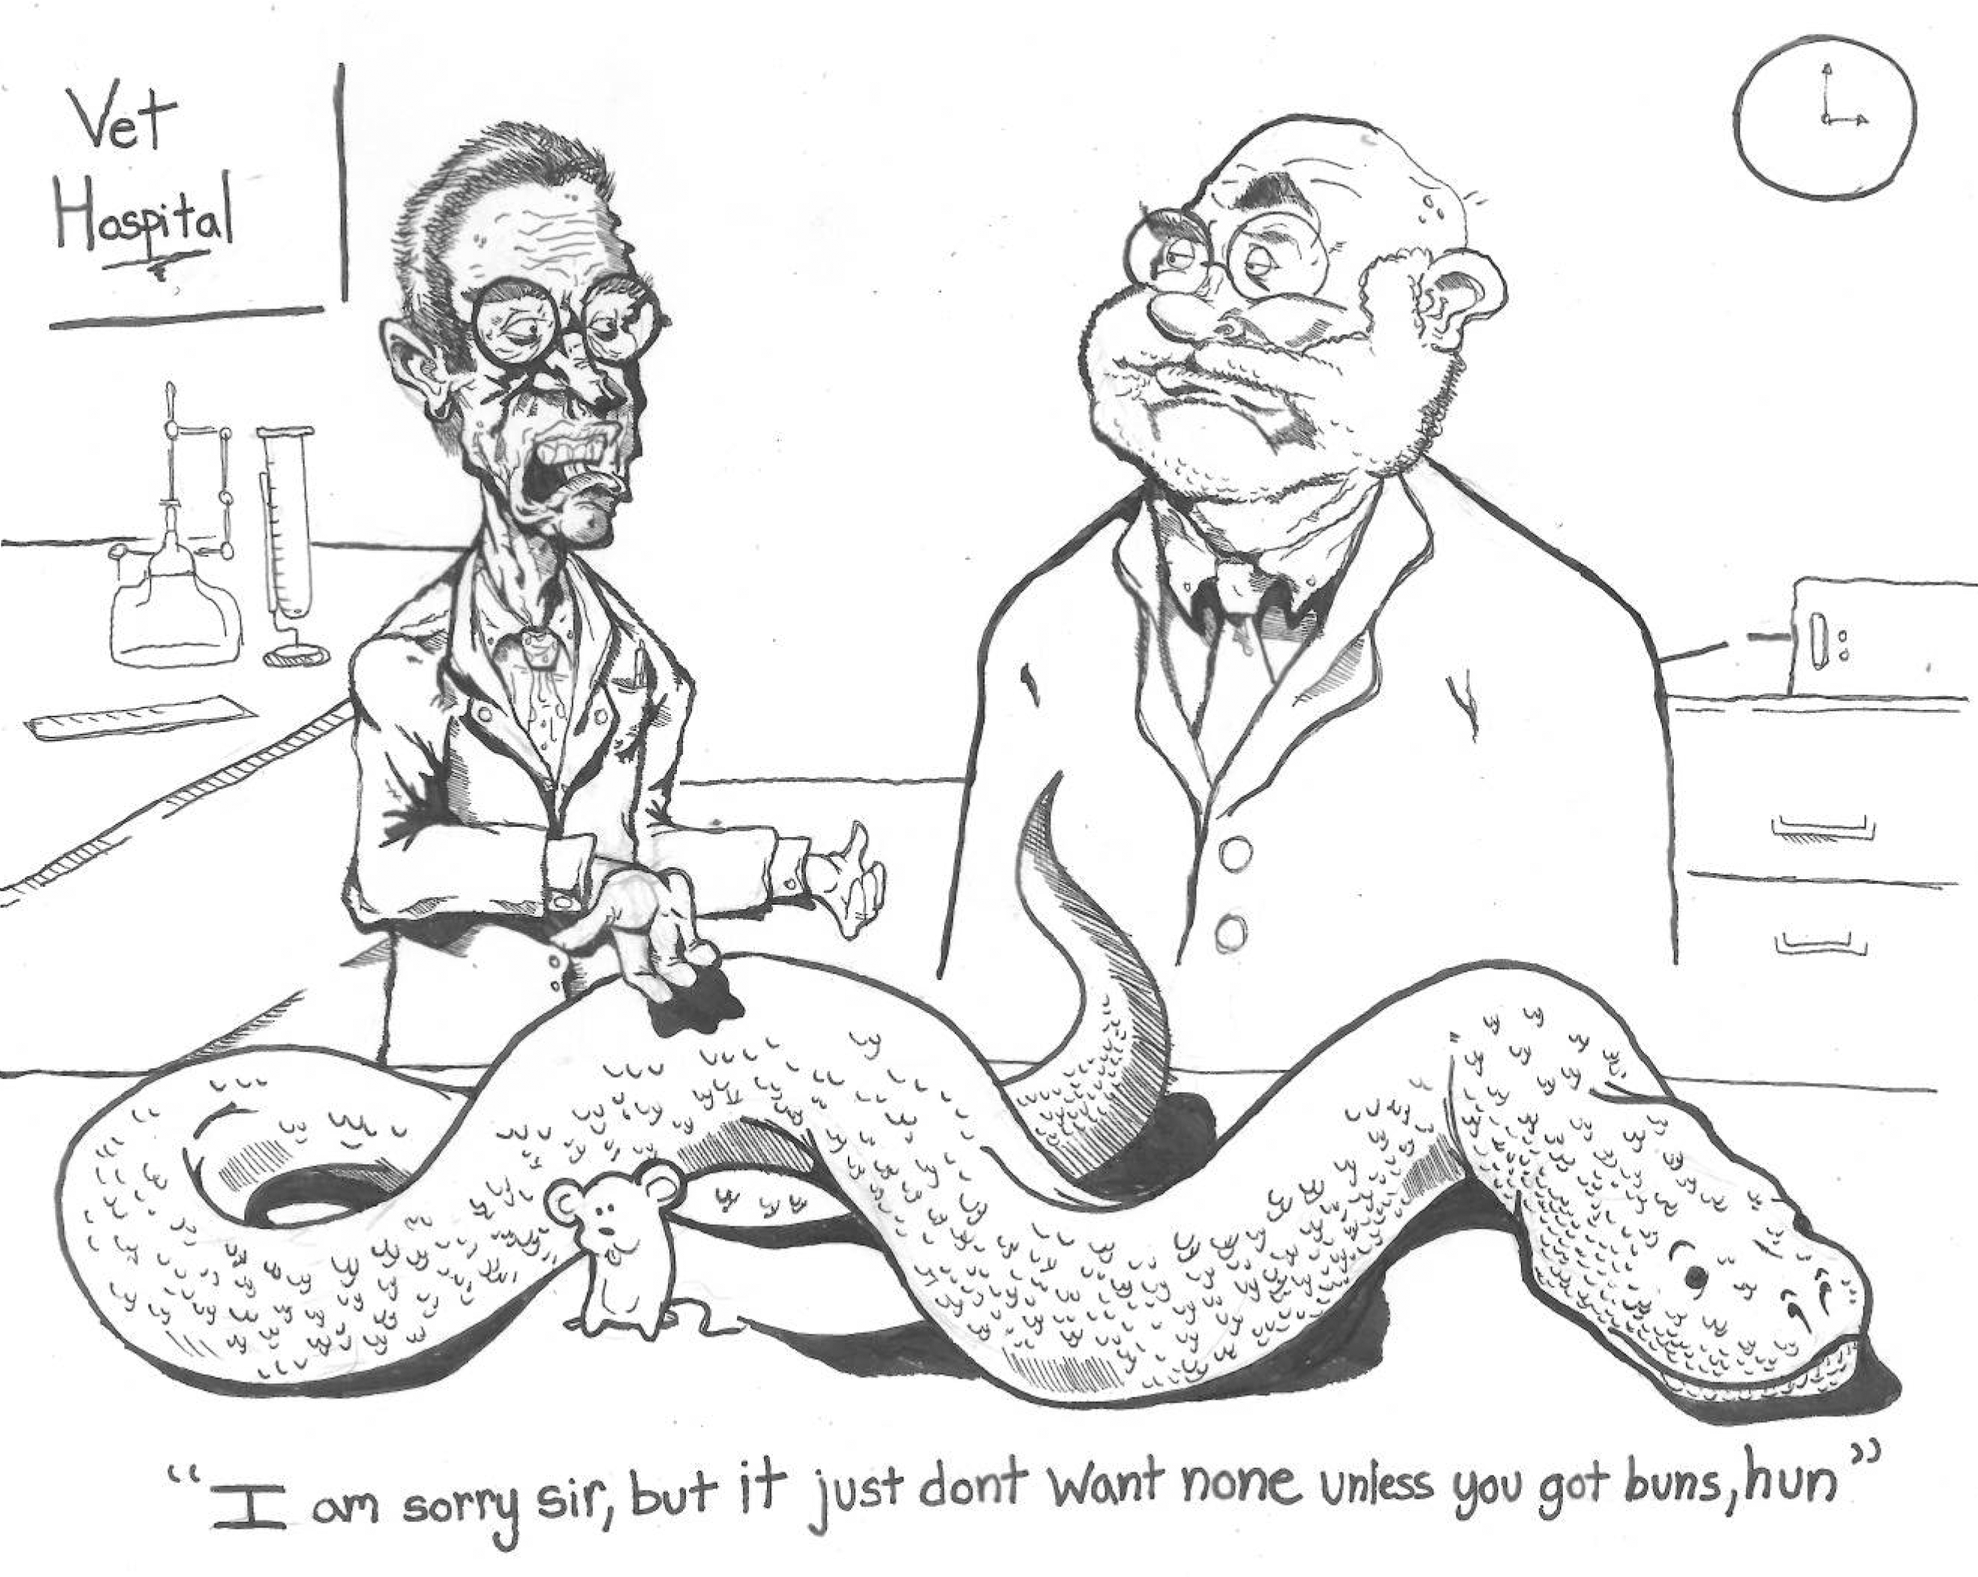 Zach Elkwood's cartoons appear in Friday's issue of the Wheel.